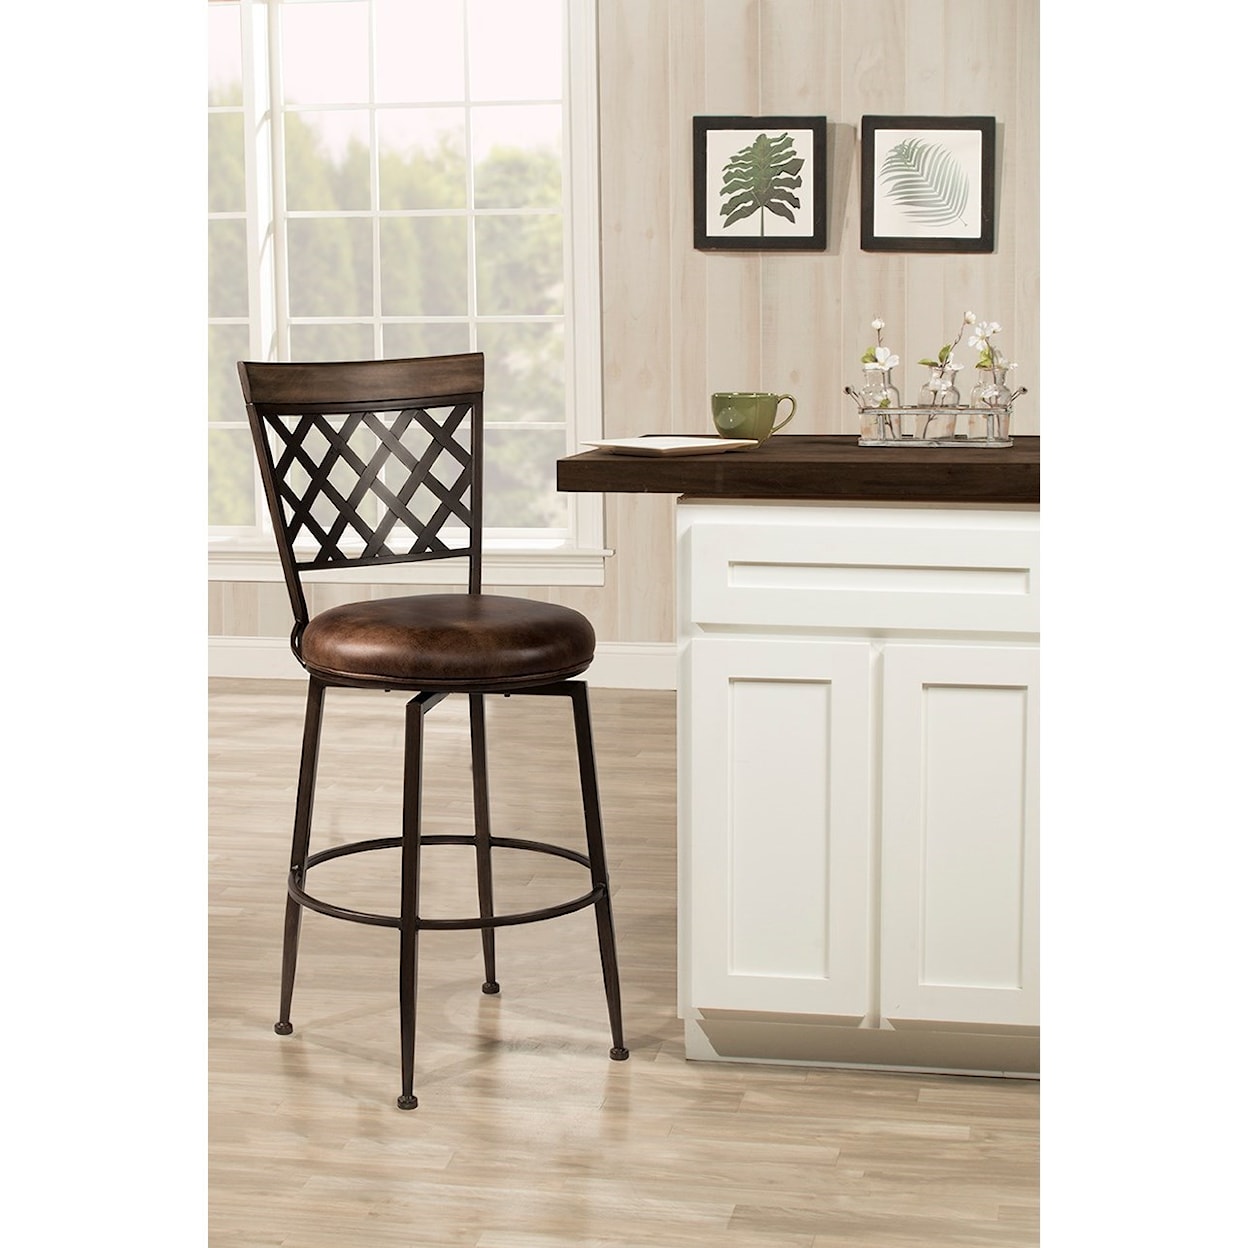 Hillsdale Greenfield Commercial Grade Stools Swivel Counter Stool